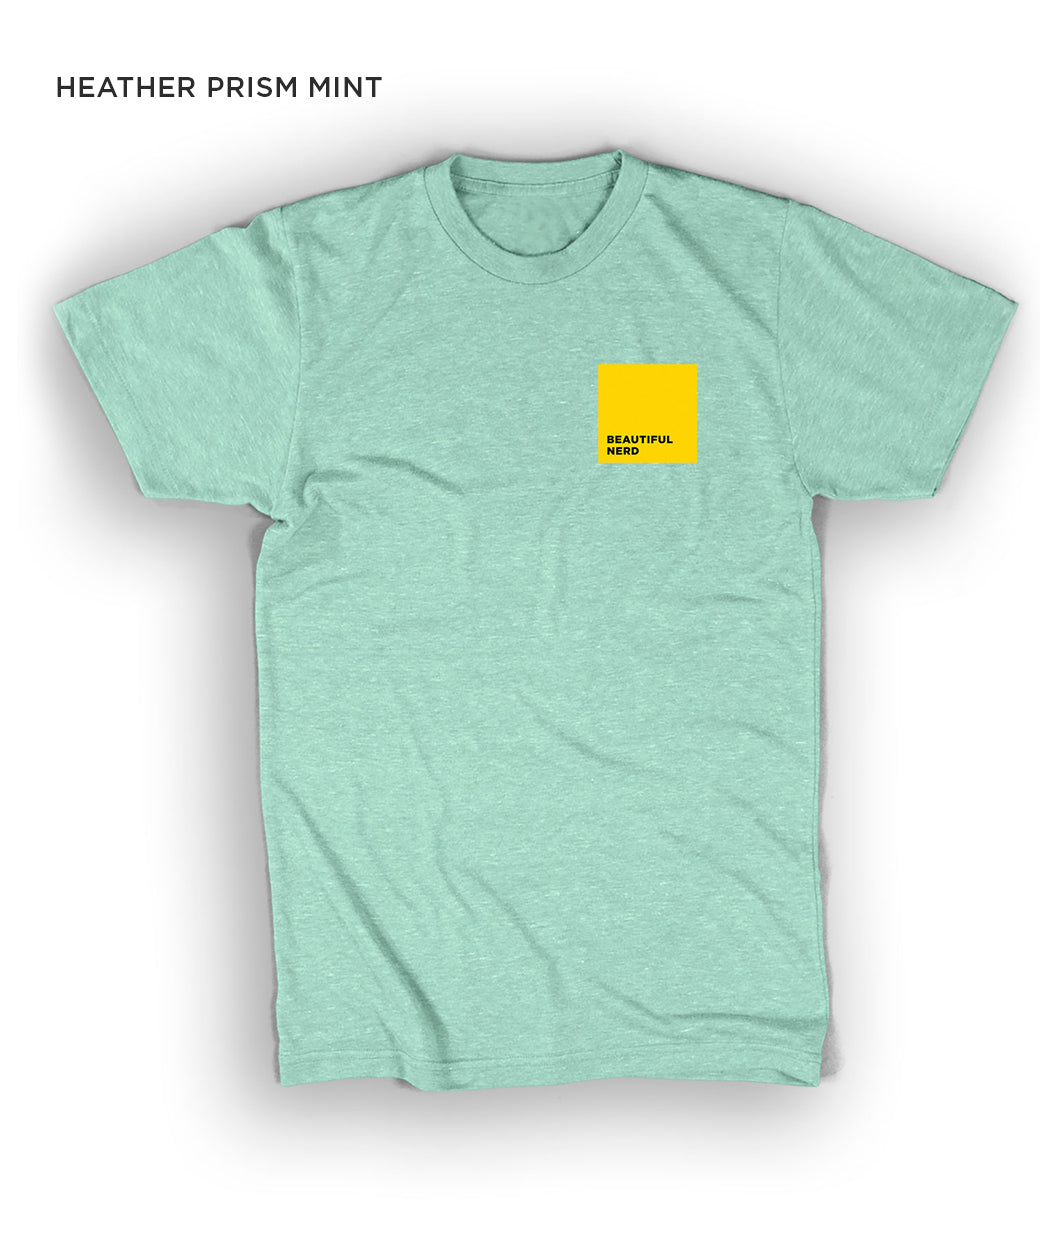 A mint short-sleeved t-shirt with a yellow square on the upper right side of the chest - by 99% Invisible